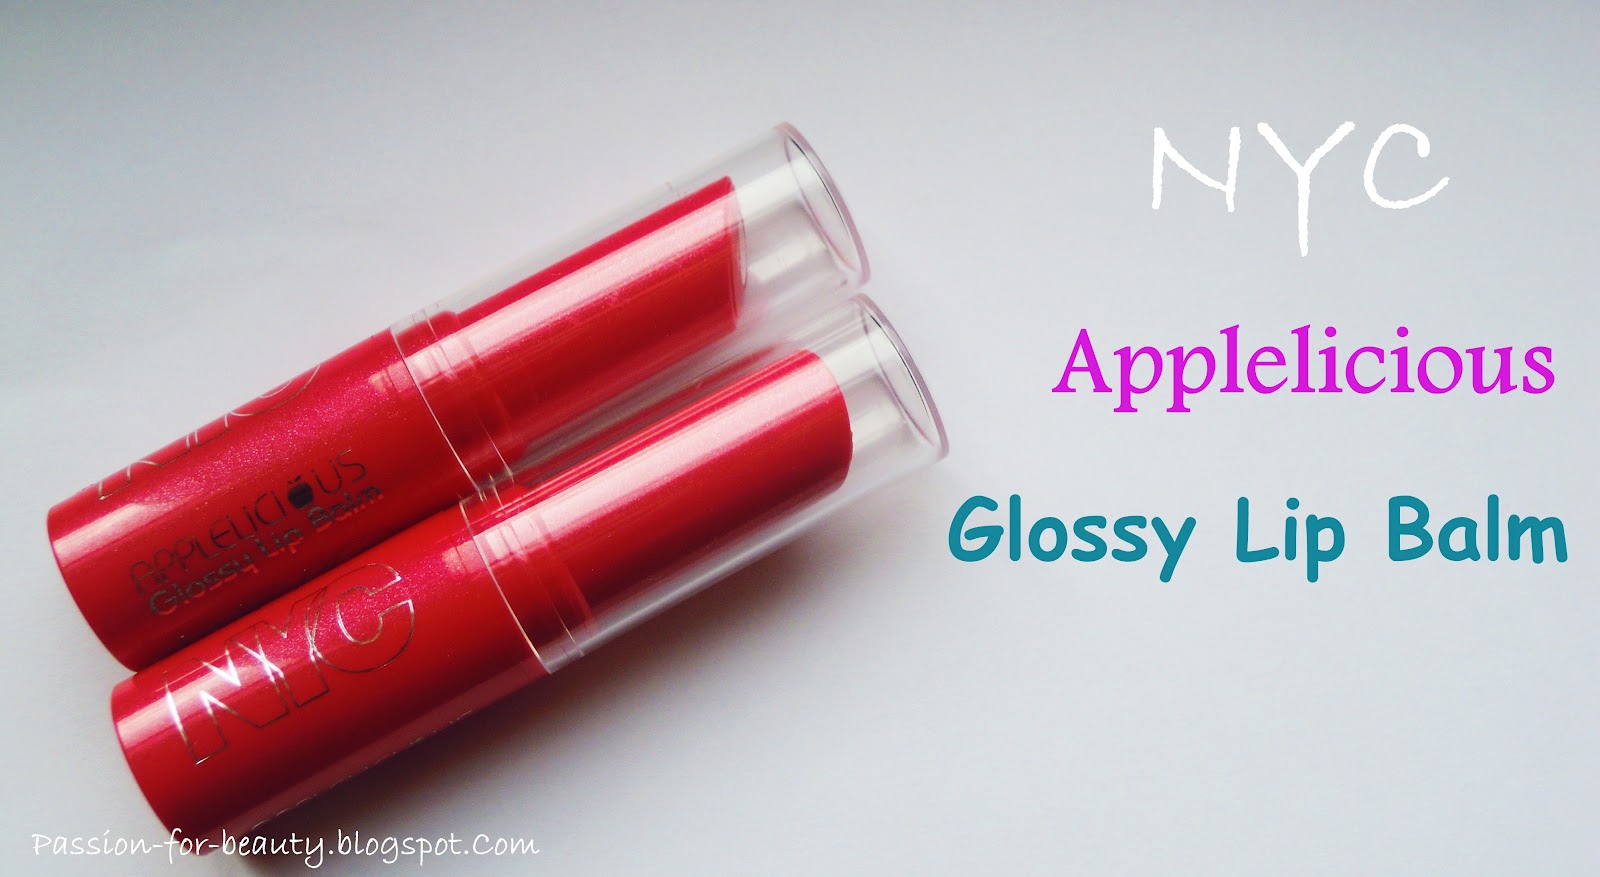 Because beauty is a passion: NYC Applelicious Glossy Lip Balm